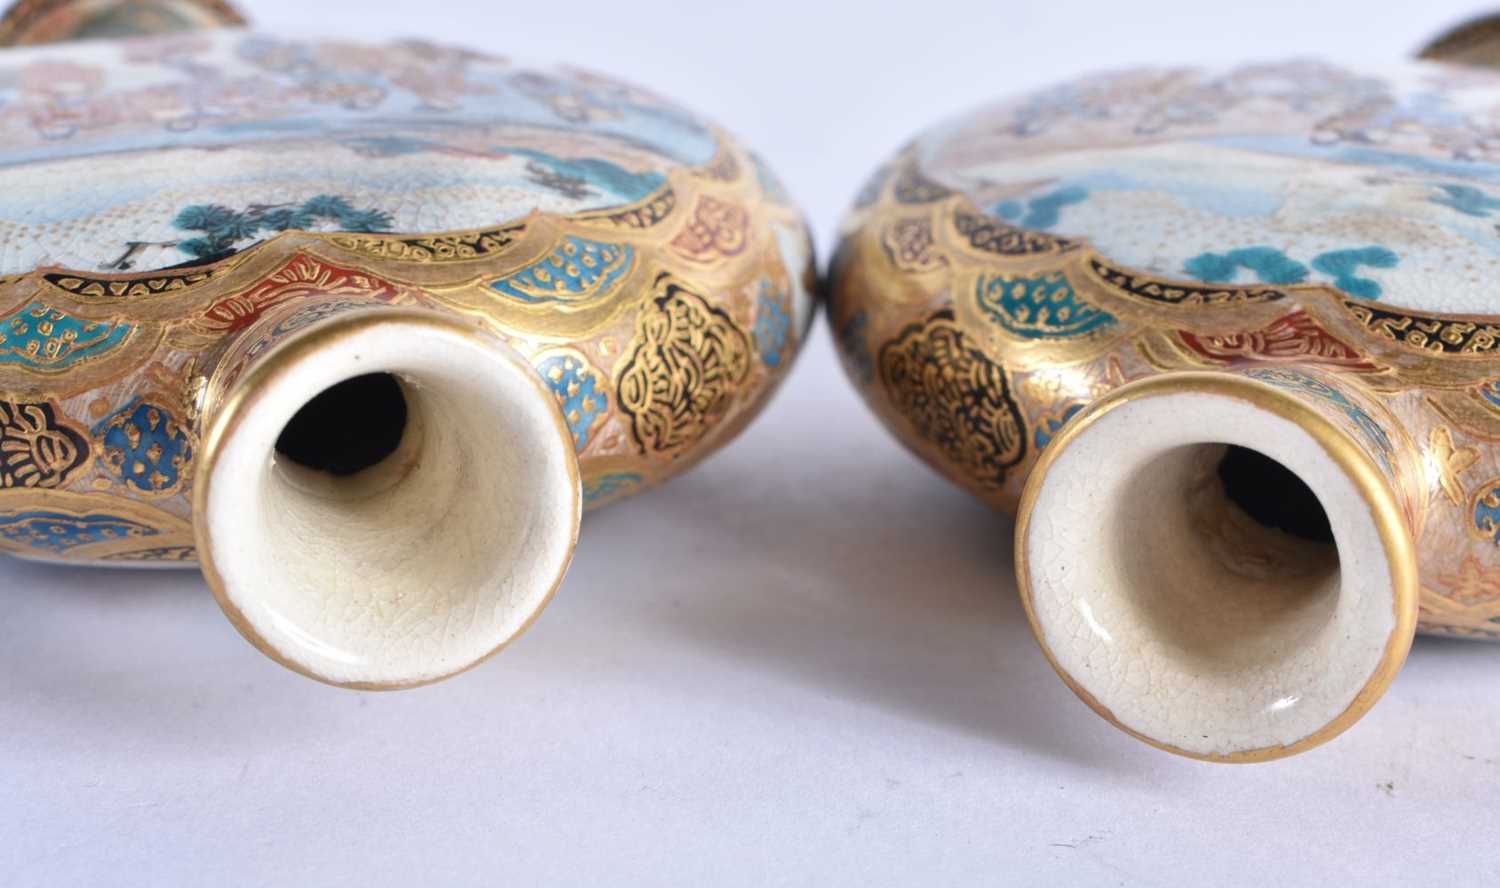 A PAIR OF 19TH CENTURY JAPANESE MEIJI PERIOD SATSUMA MOON FLASKS by Shimazu, painted with numerous - Image 6 of 7